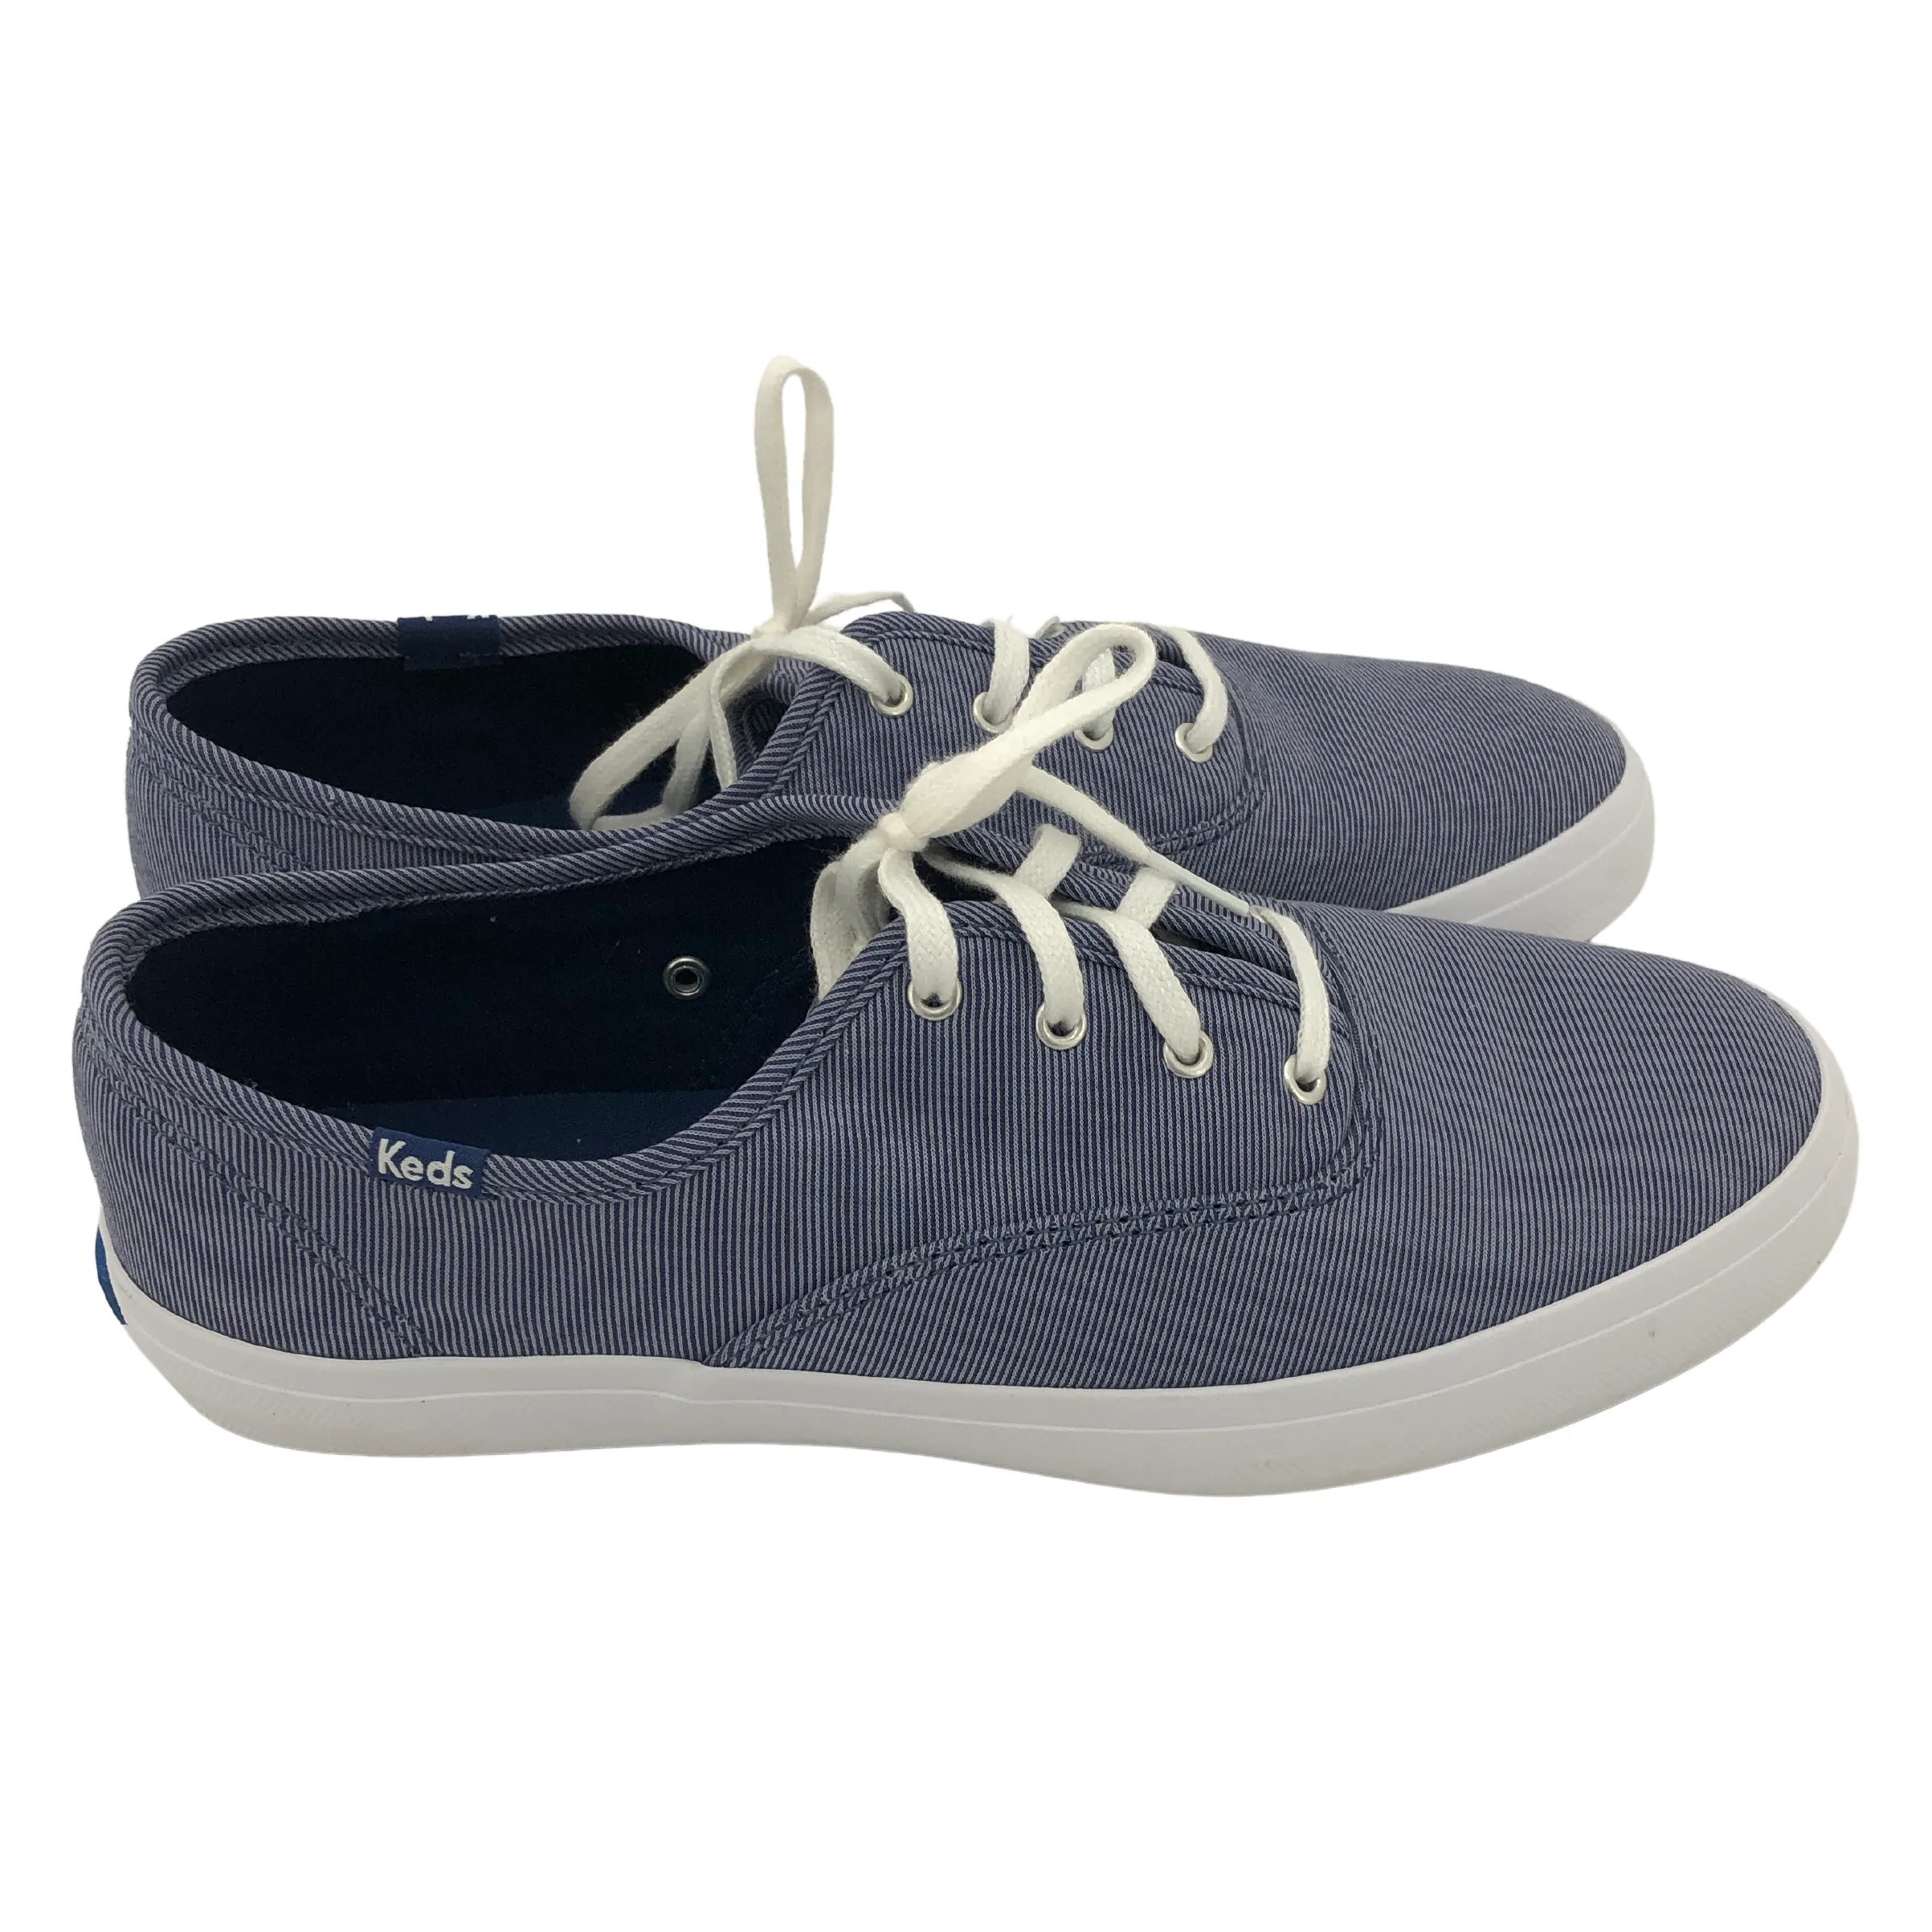 Keds Women's Canvas Shoes / Dream Foam Insole / Blue with White / Size 10